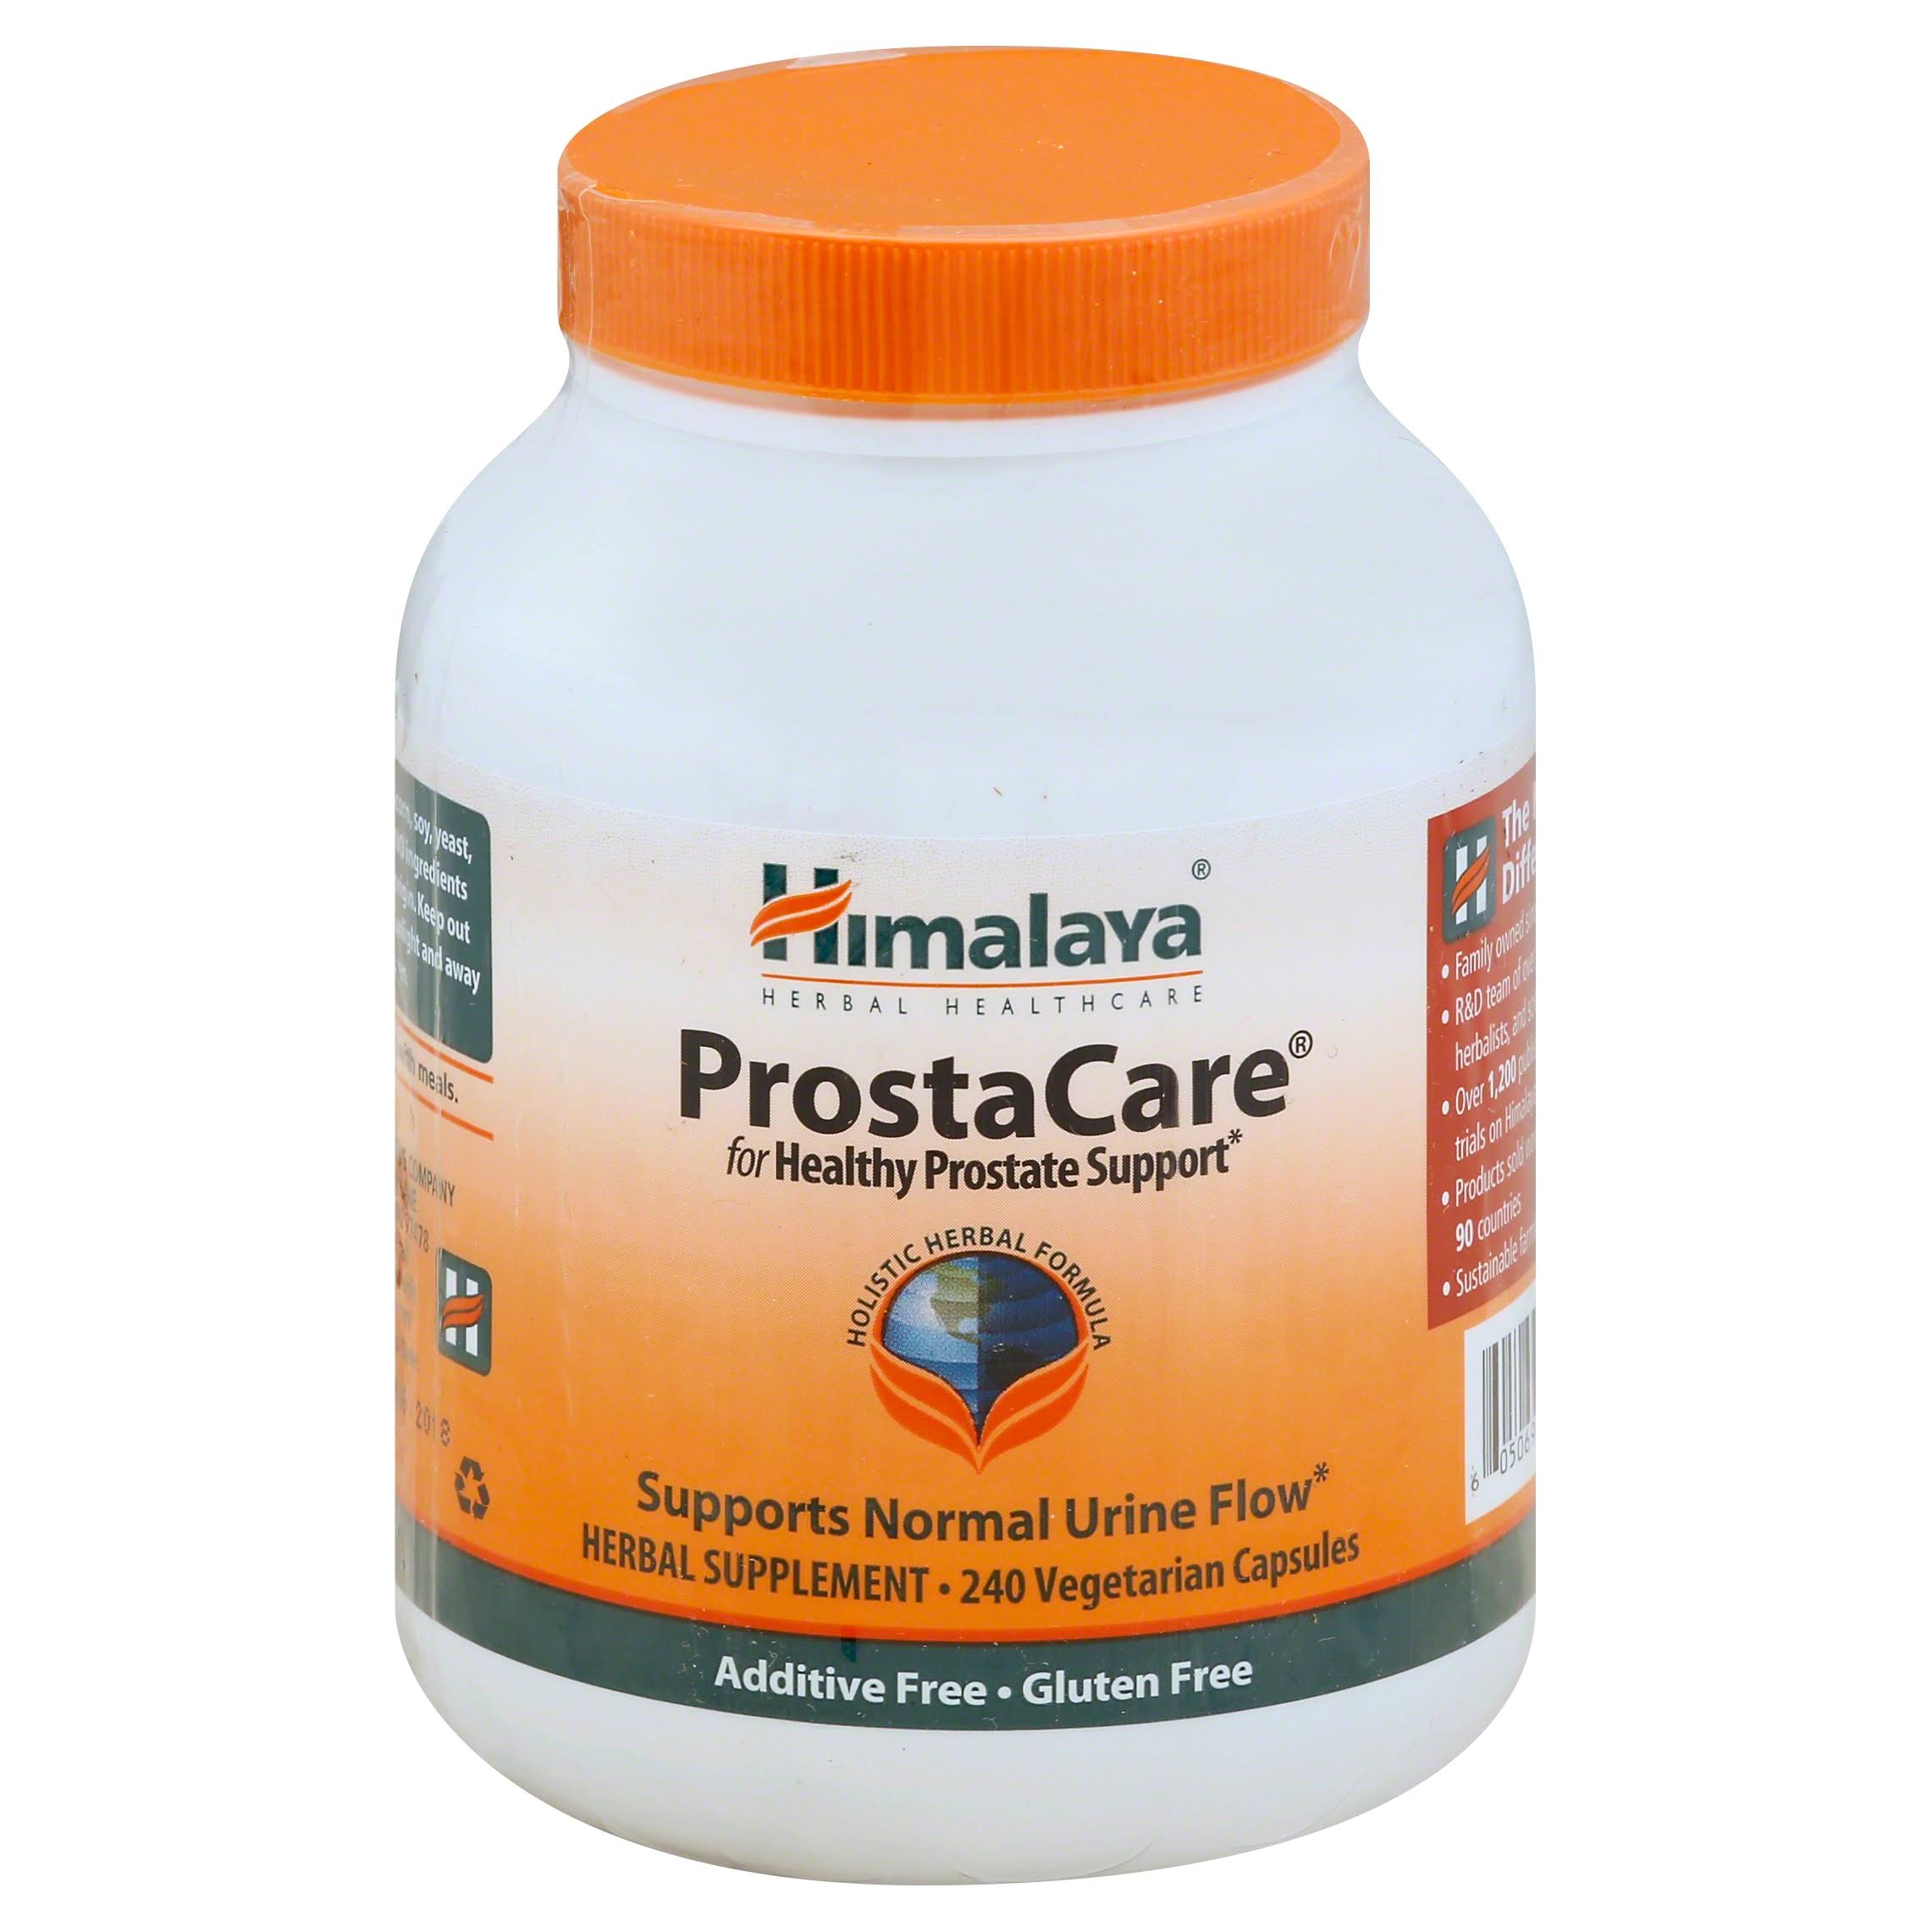 Himalaya Herbal ProstaCare Prostate Support supplement